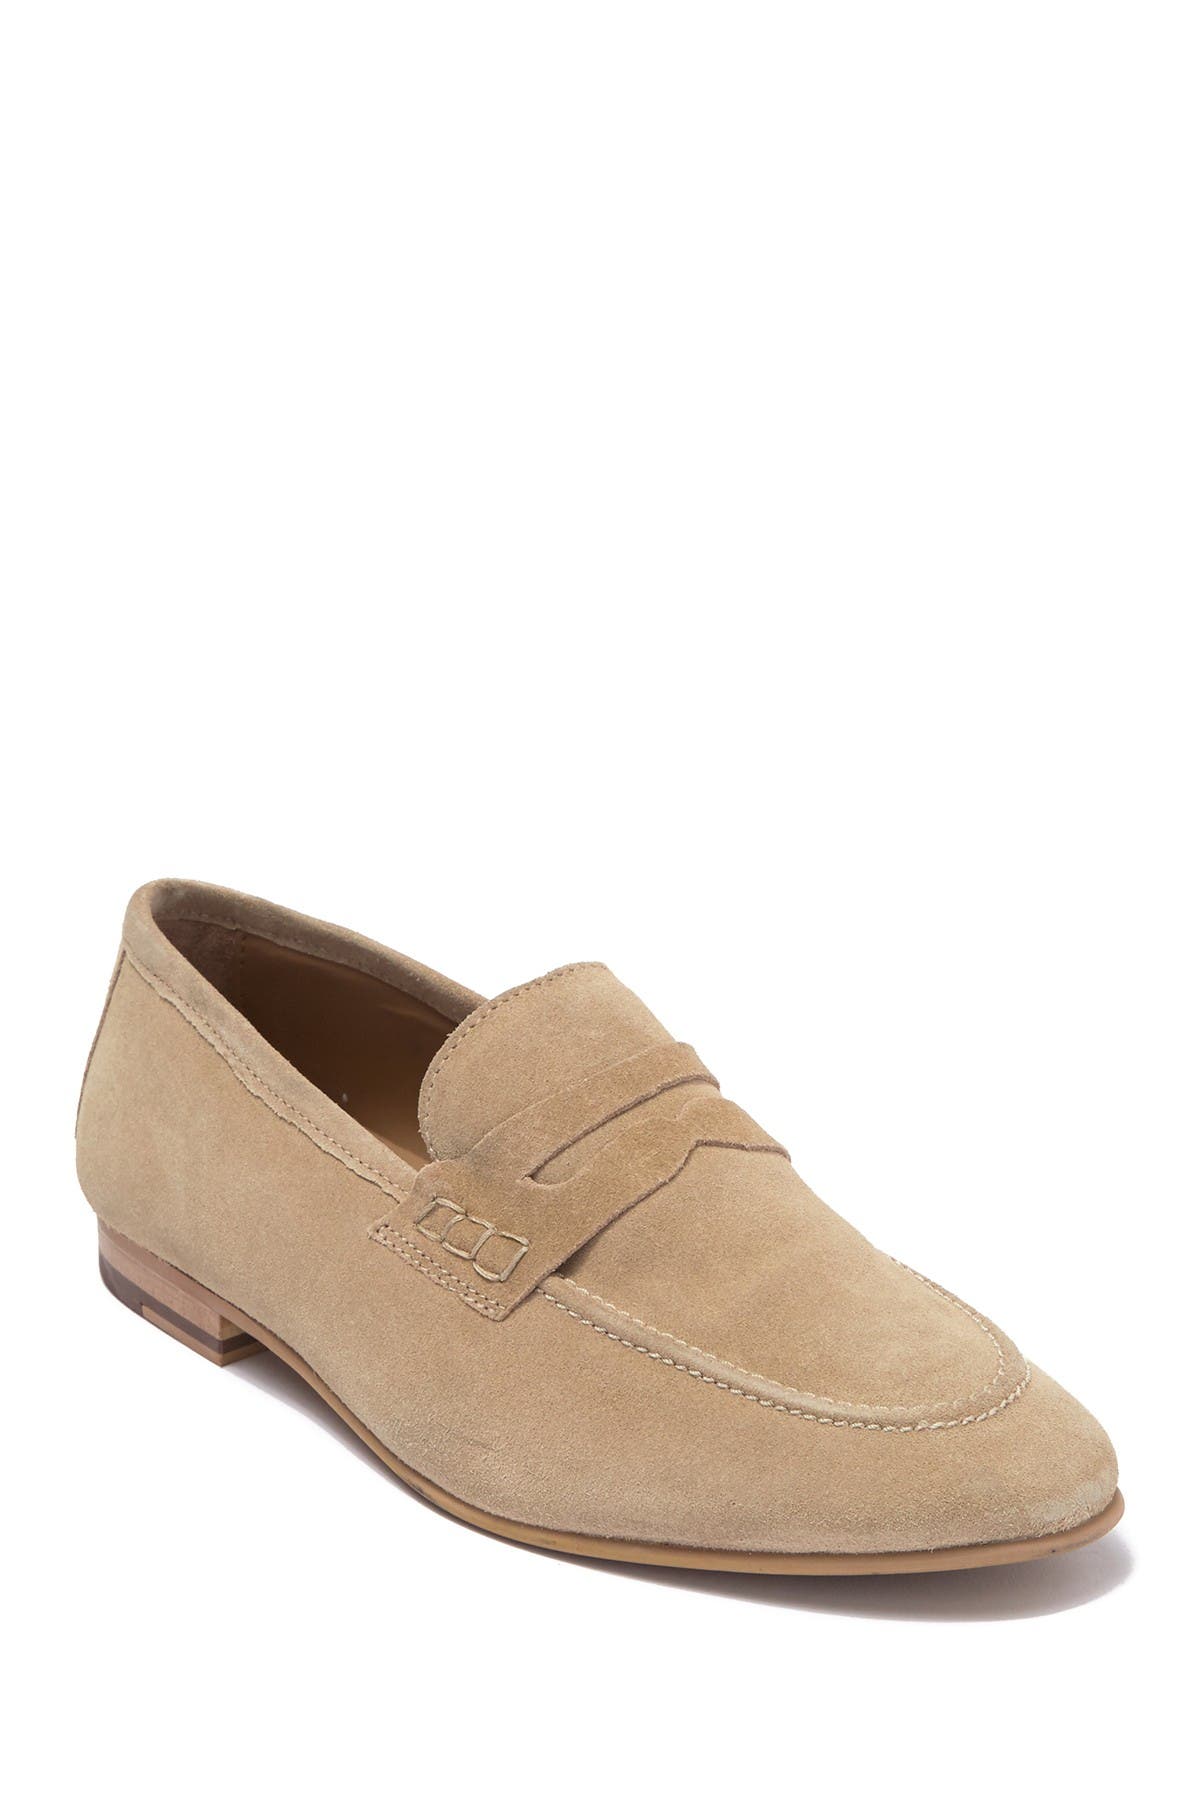 topman shoes loafers